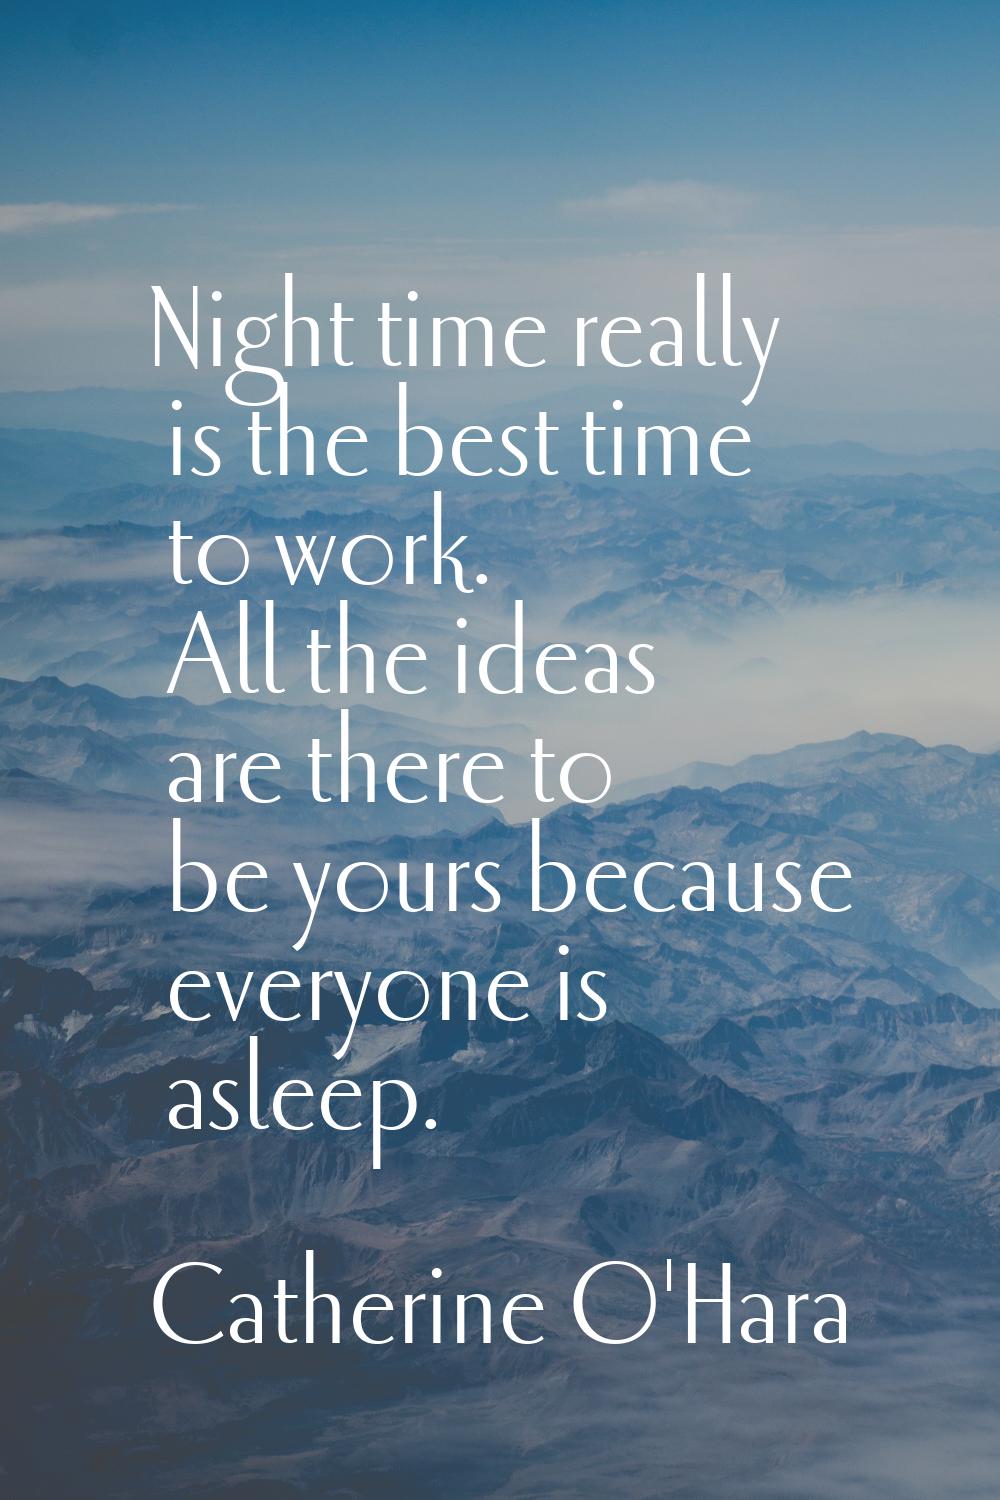 Night time really is the best time to work. All the ideas are there to be yours because everyone is